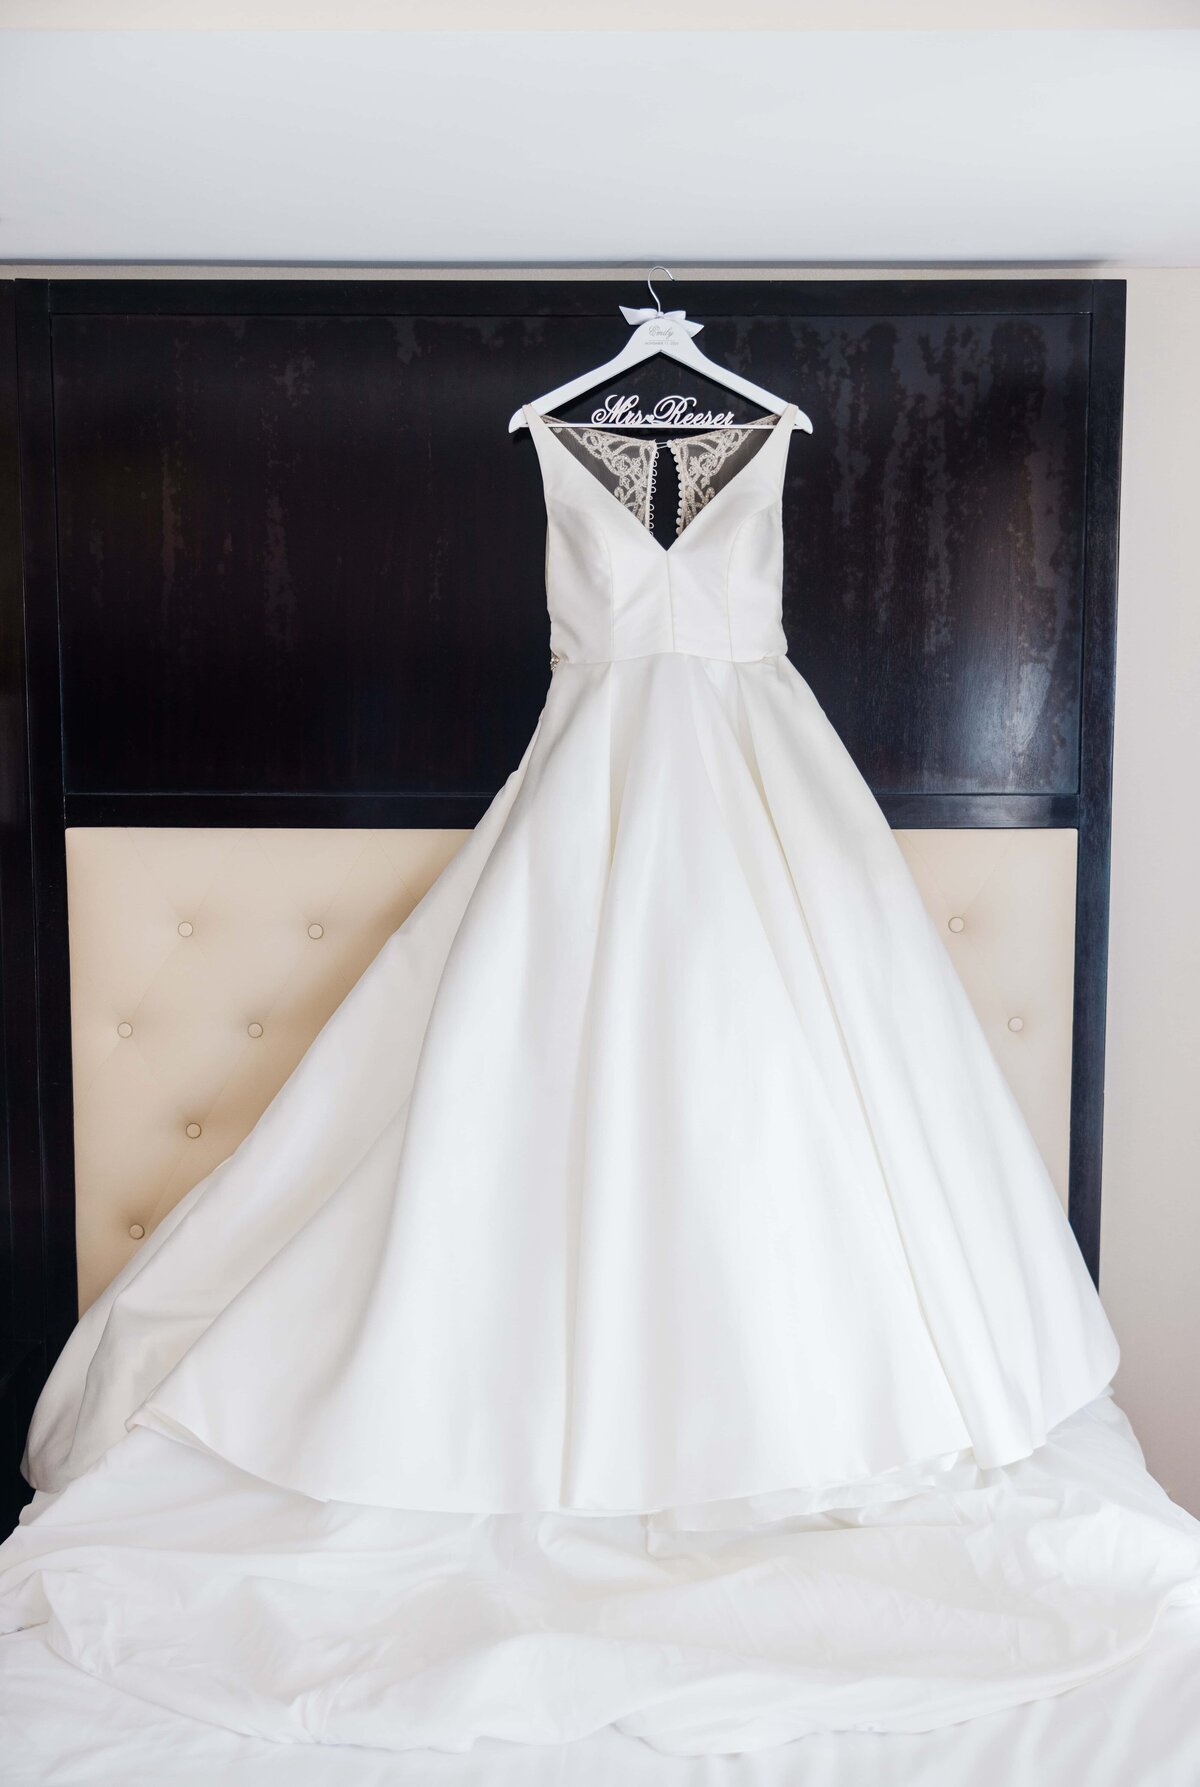 A white wedding dress hanging on a dark wooden door at a farm winery, featuring an embroidered bodice and a voluminous skirt.